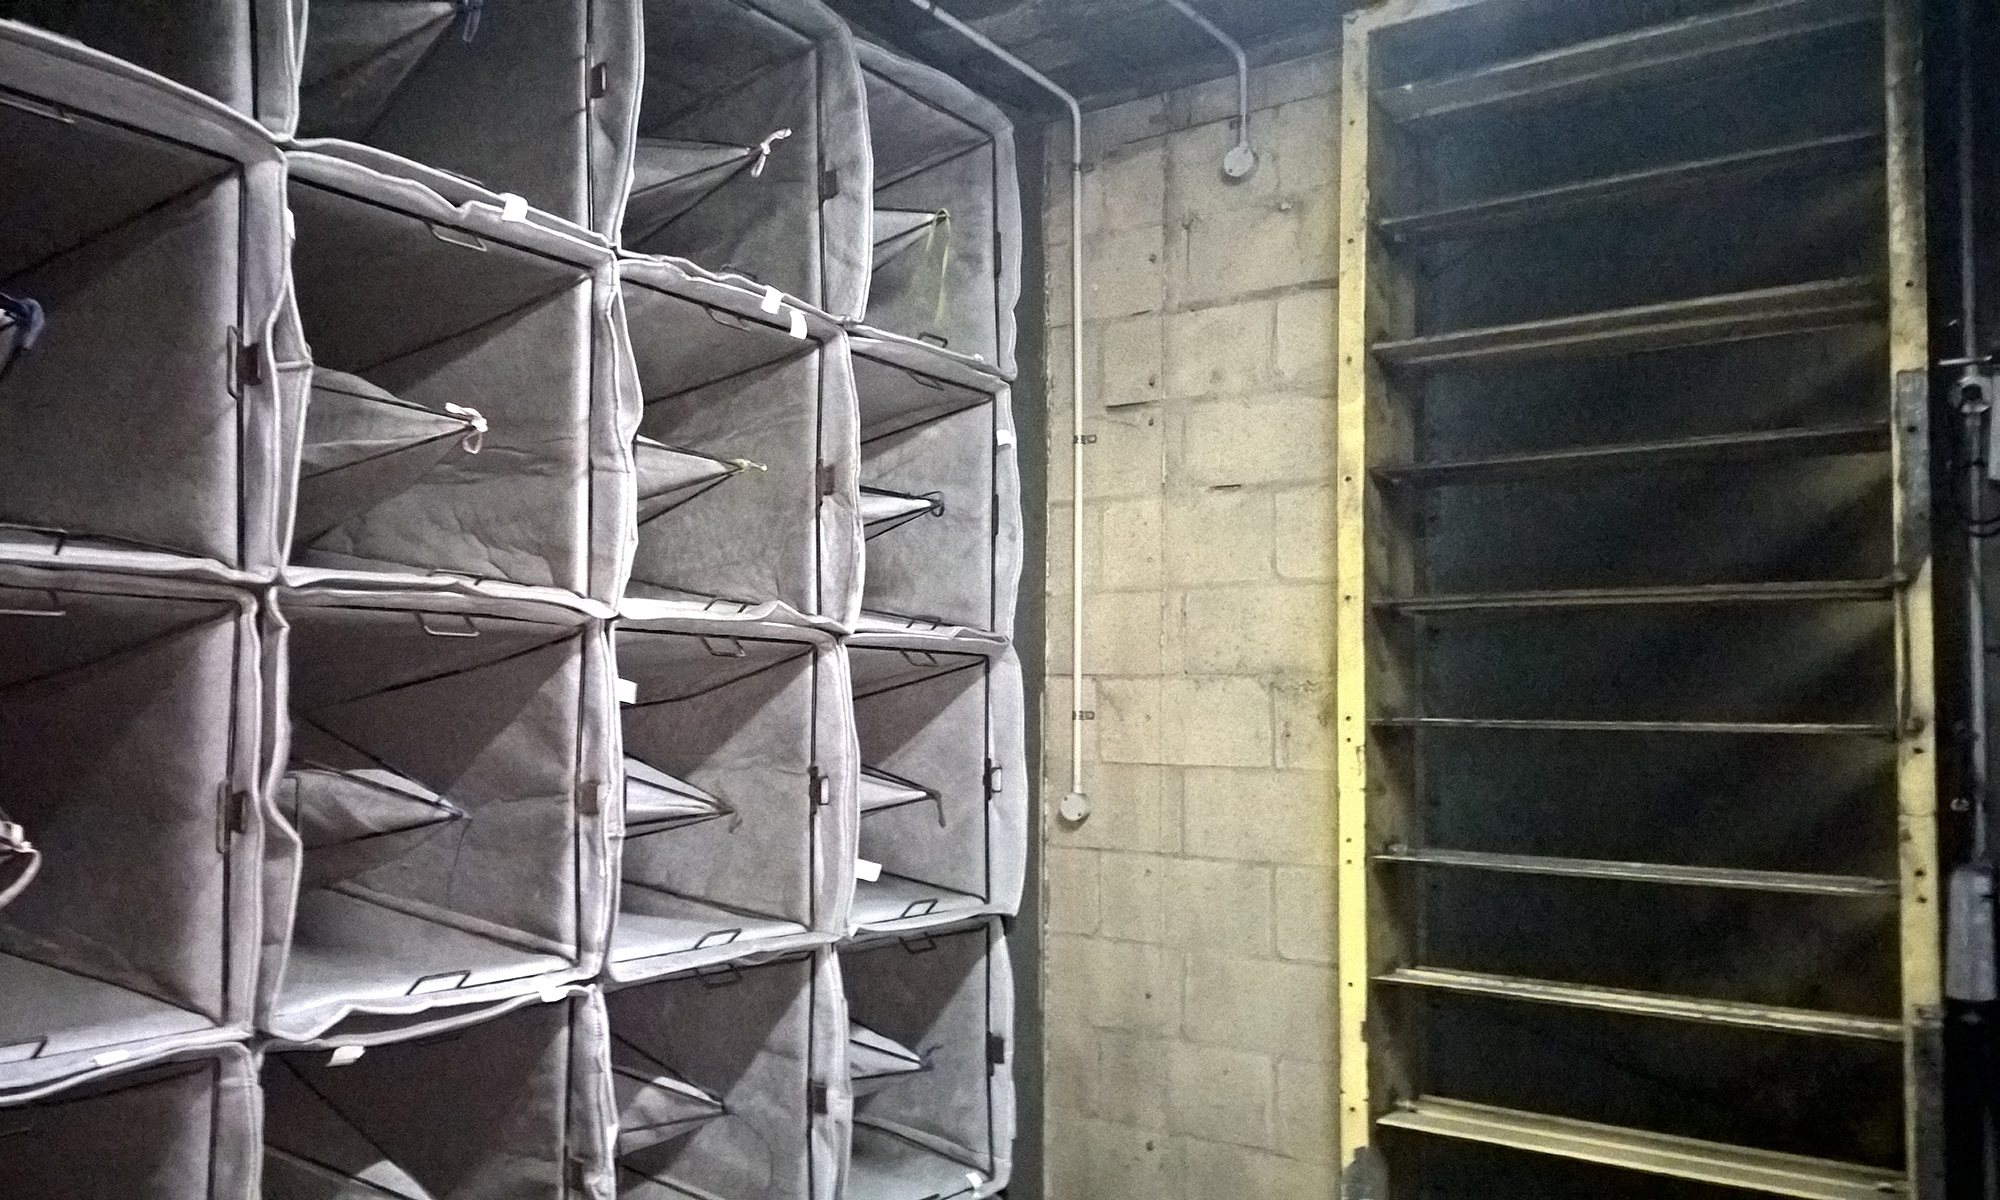 Forte Asset Services HVAC Mechanical Air Handling Unit Air Filters and Economy Dampers in Sydney CBD Comemrcial Building